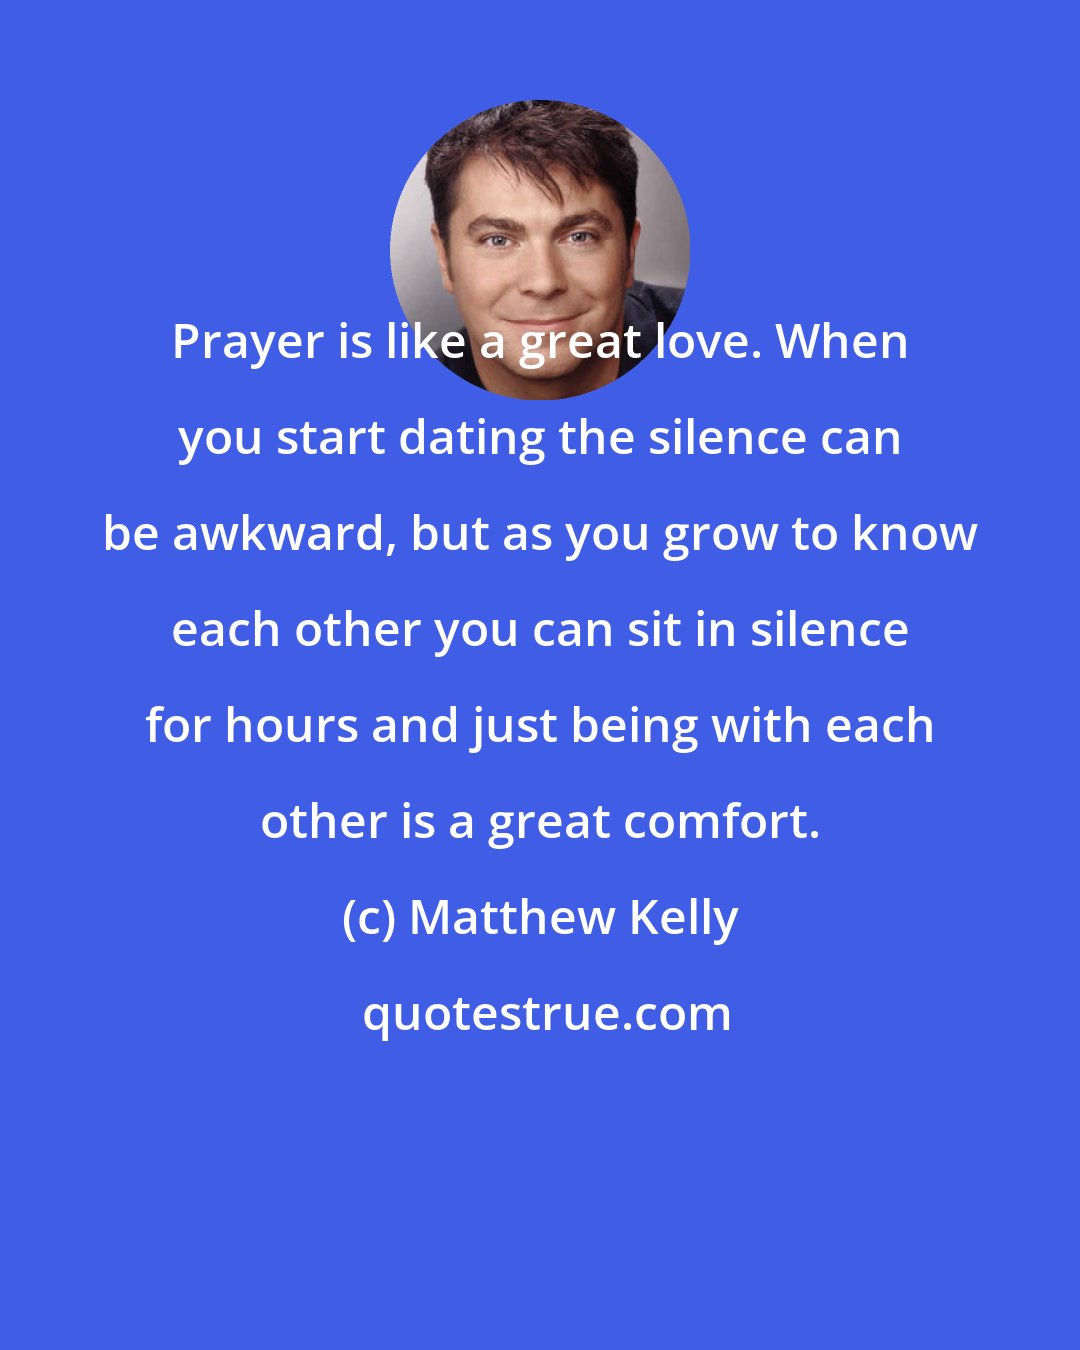 Matthew Kelly: Prayer is like a great love. When you start dating the silence can be awkward, but as you grow to know each other you can sit in silence for hours and just being with each other is a great comfort.